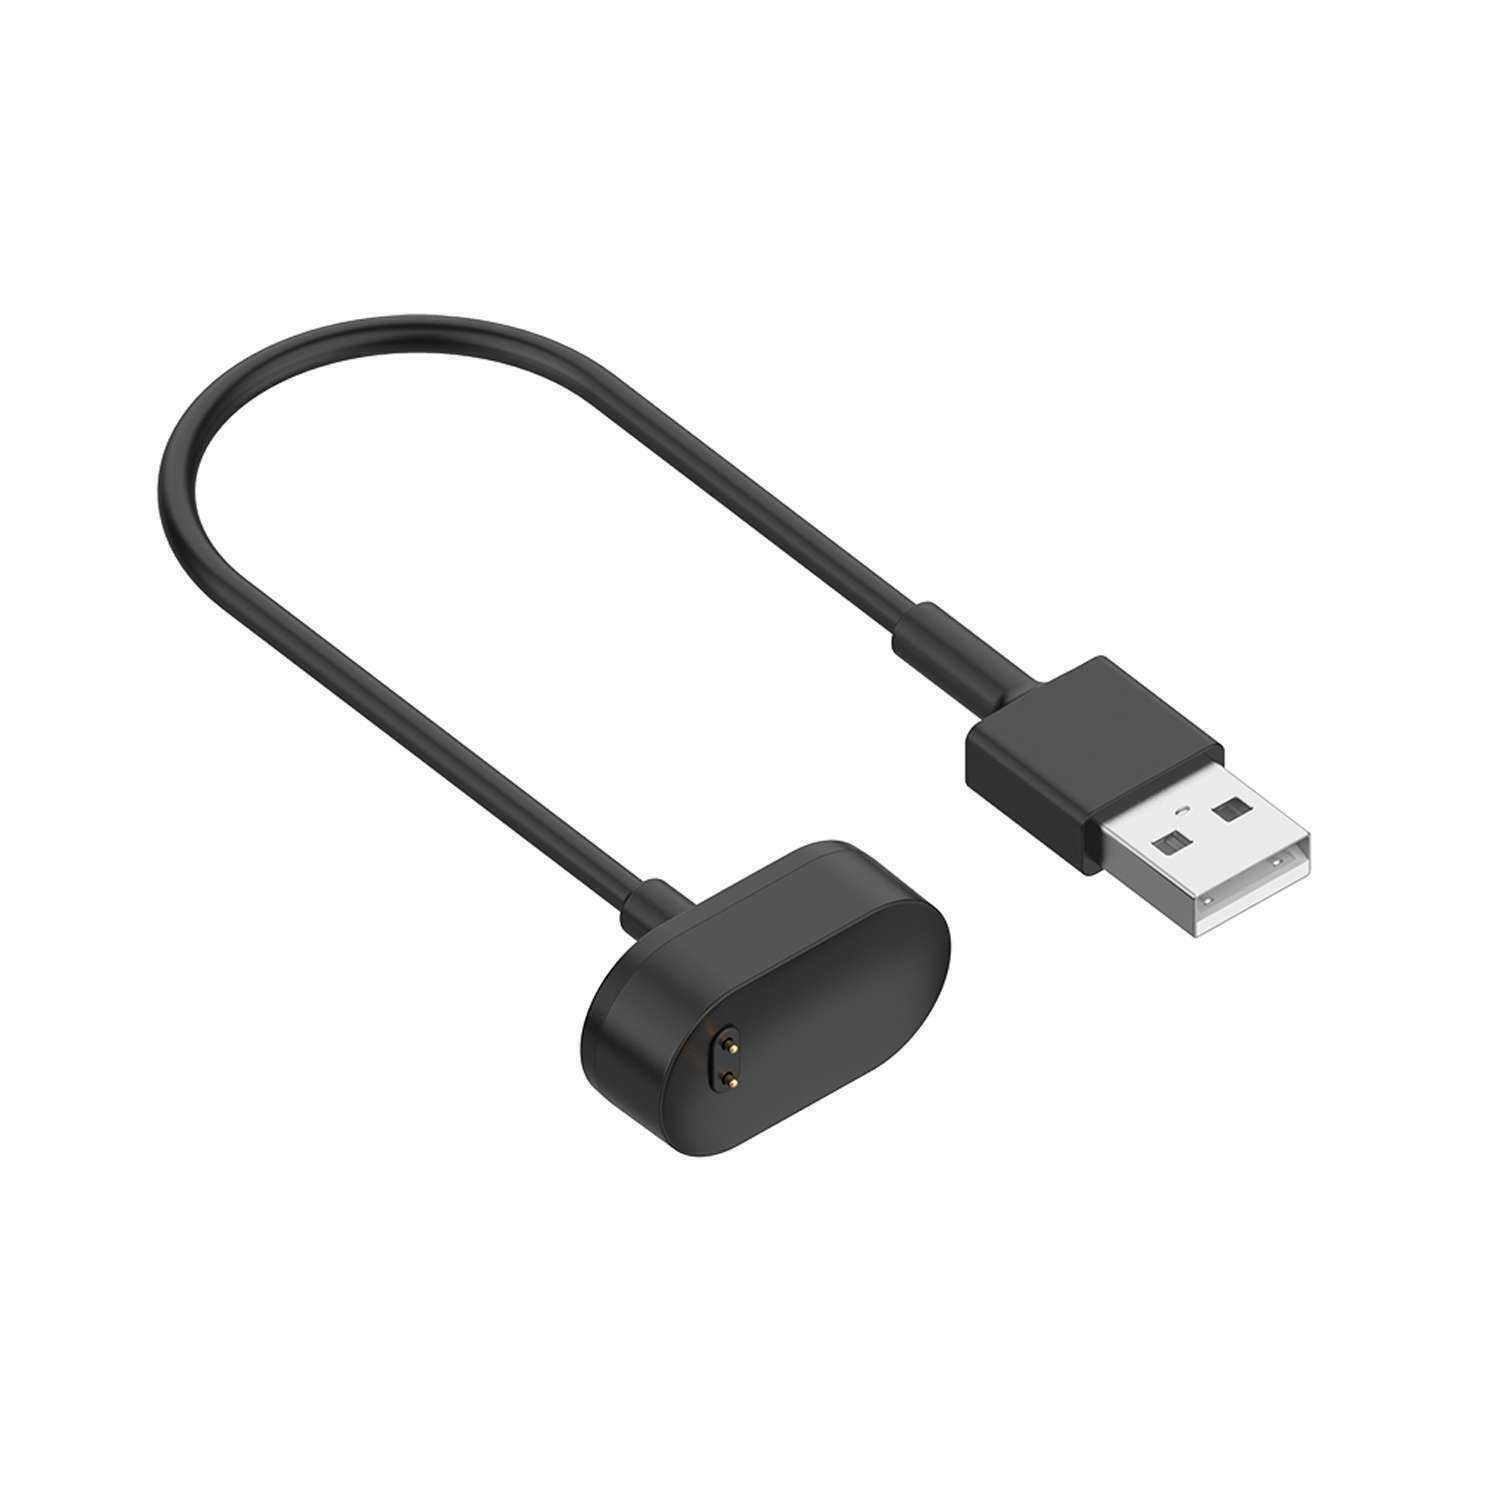 Replacement USB Charger Charging Cable For Fitbit Inspire and Inspire HR Tracker